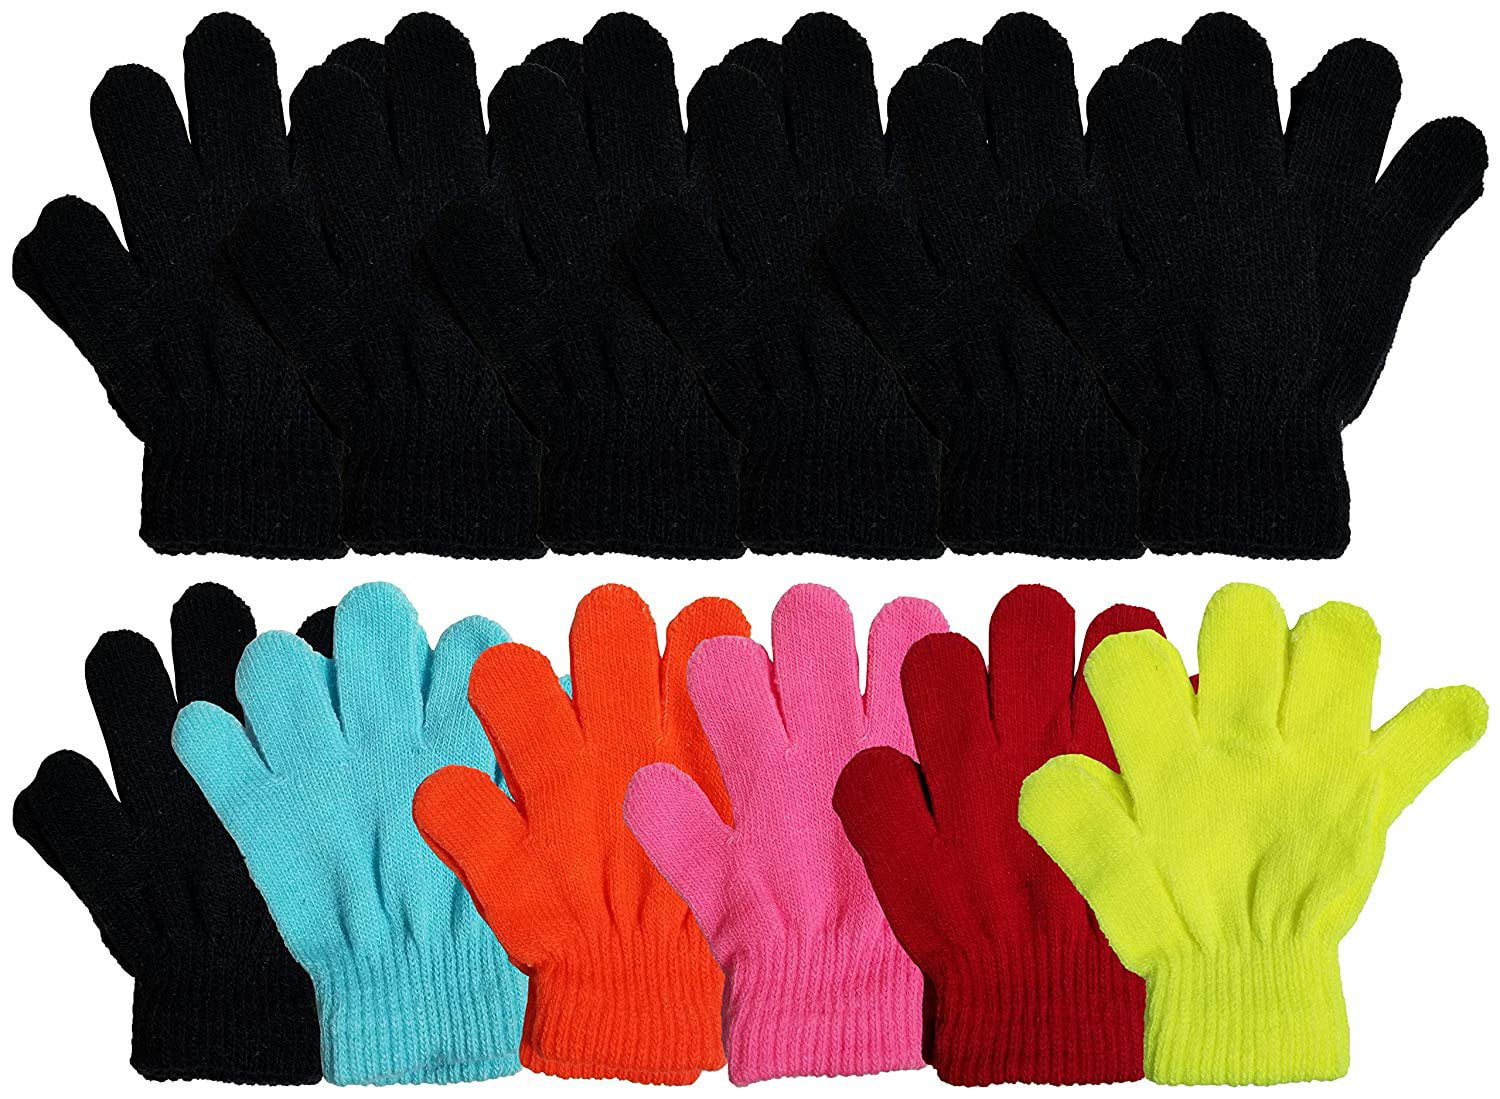 Cooraby 12 Pairs Kids Warm Magic Gloves Teens Winter Stretchy Knit Gloves Boys Girls Knit Gloves